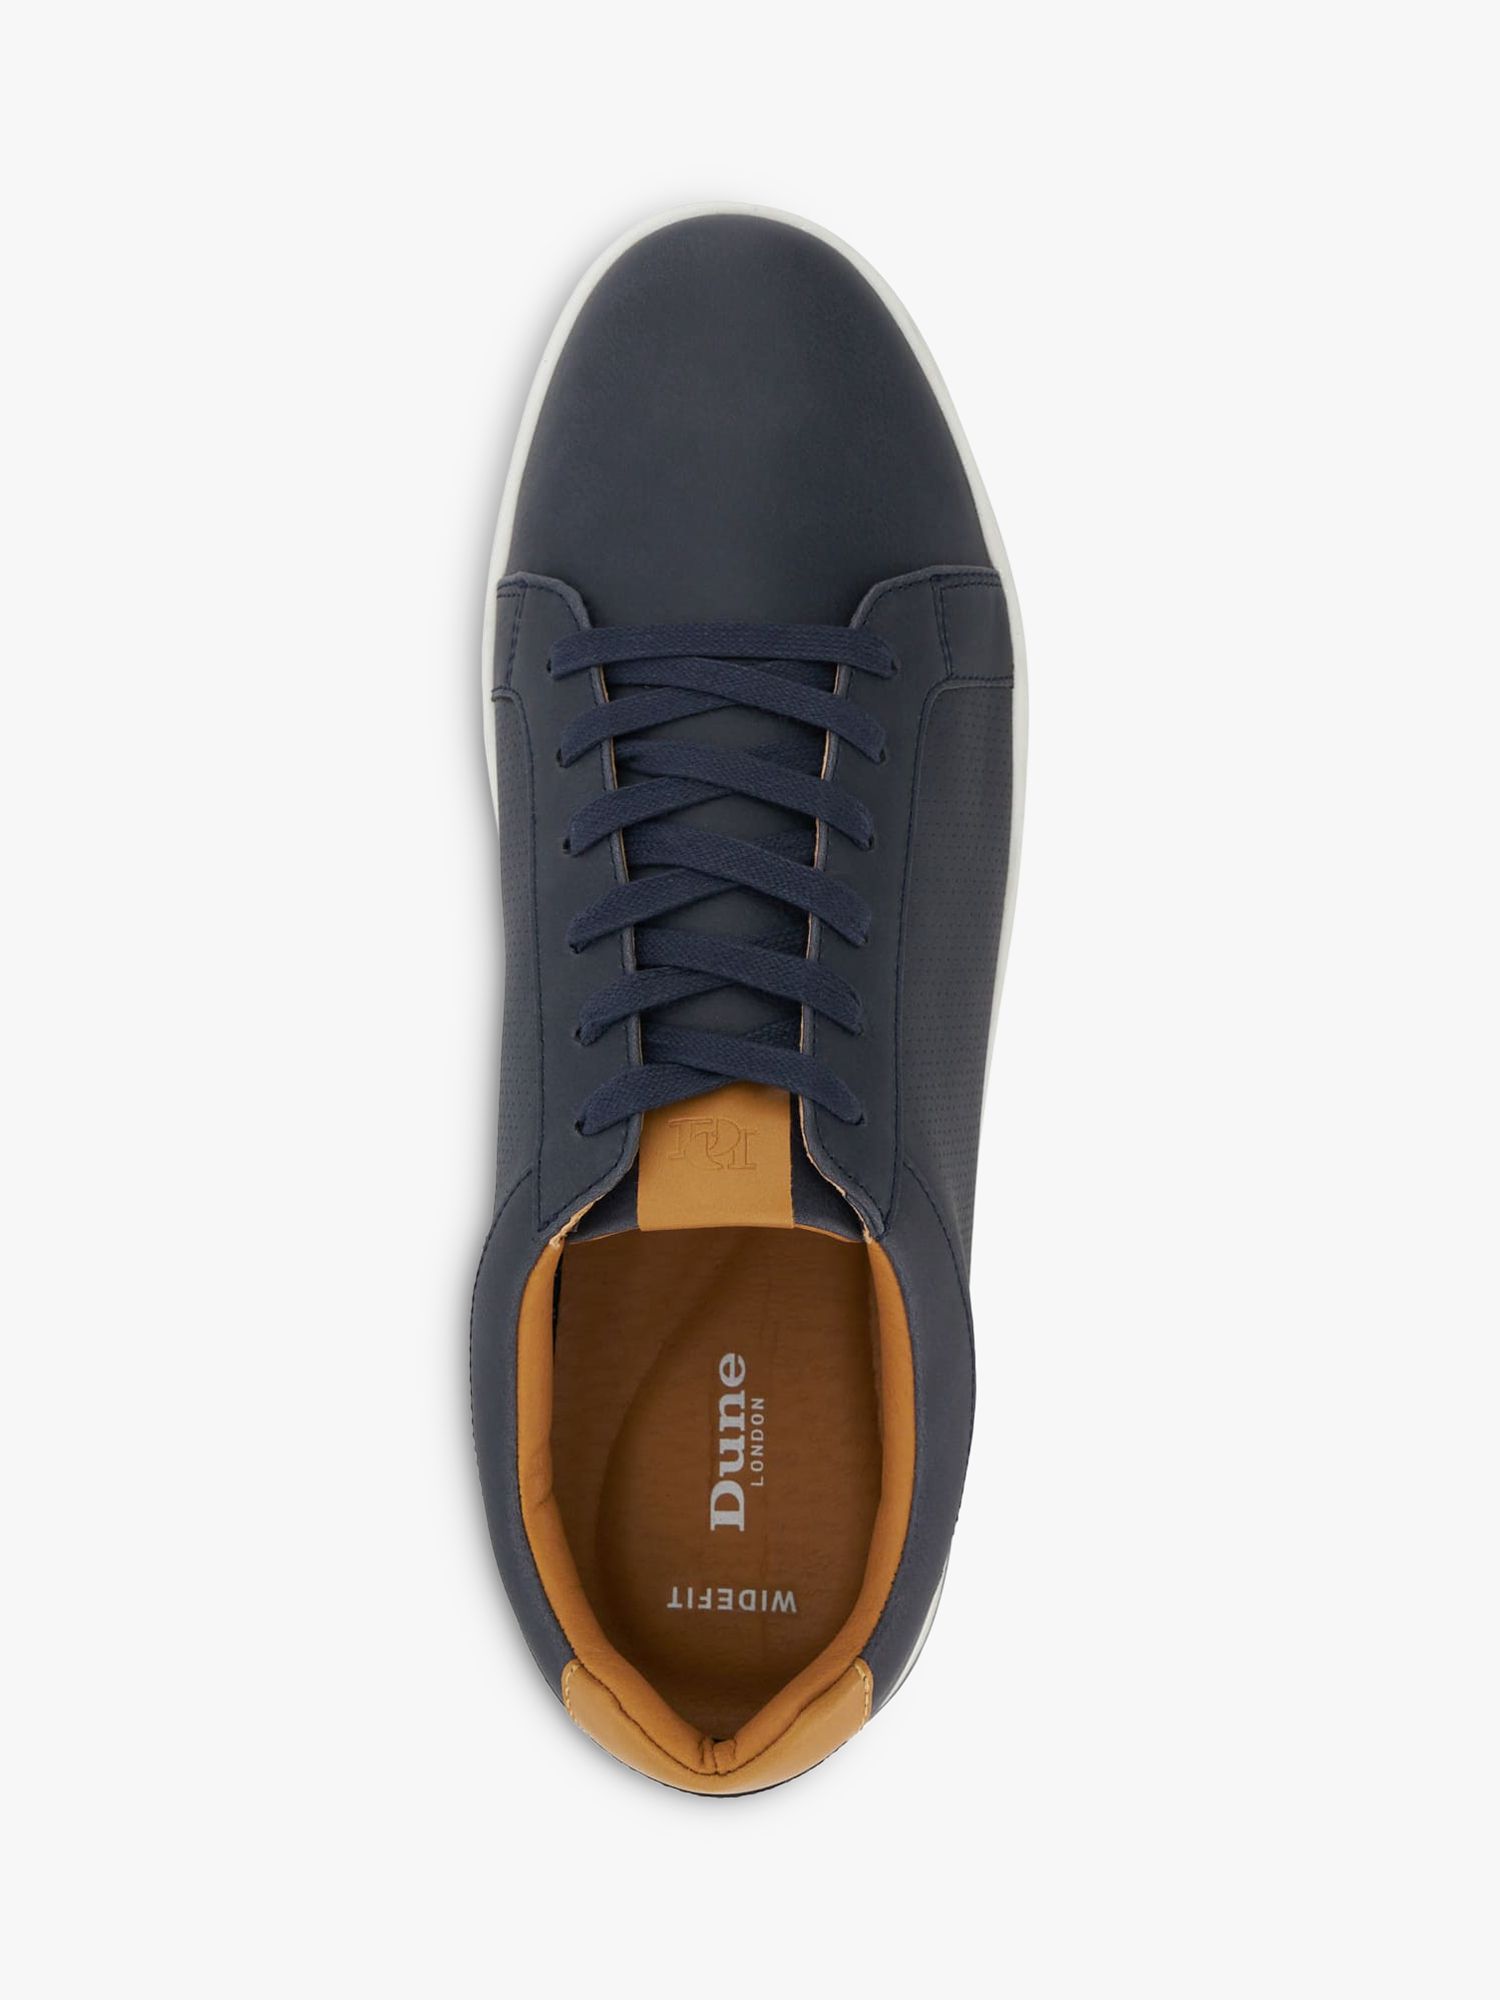 Buy Dune Wide Fit Tezzy Lace Up Trainers, Navy Online at johnlewis.com